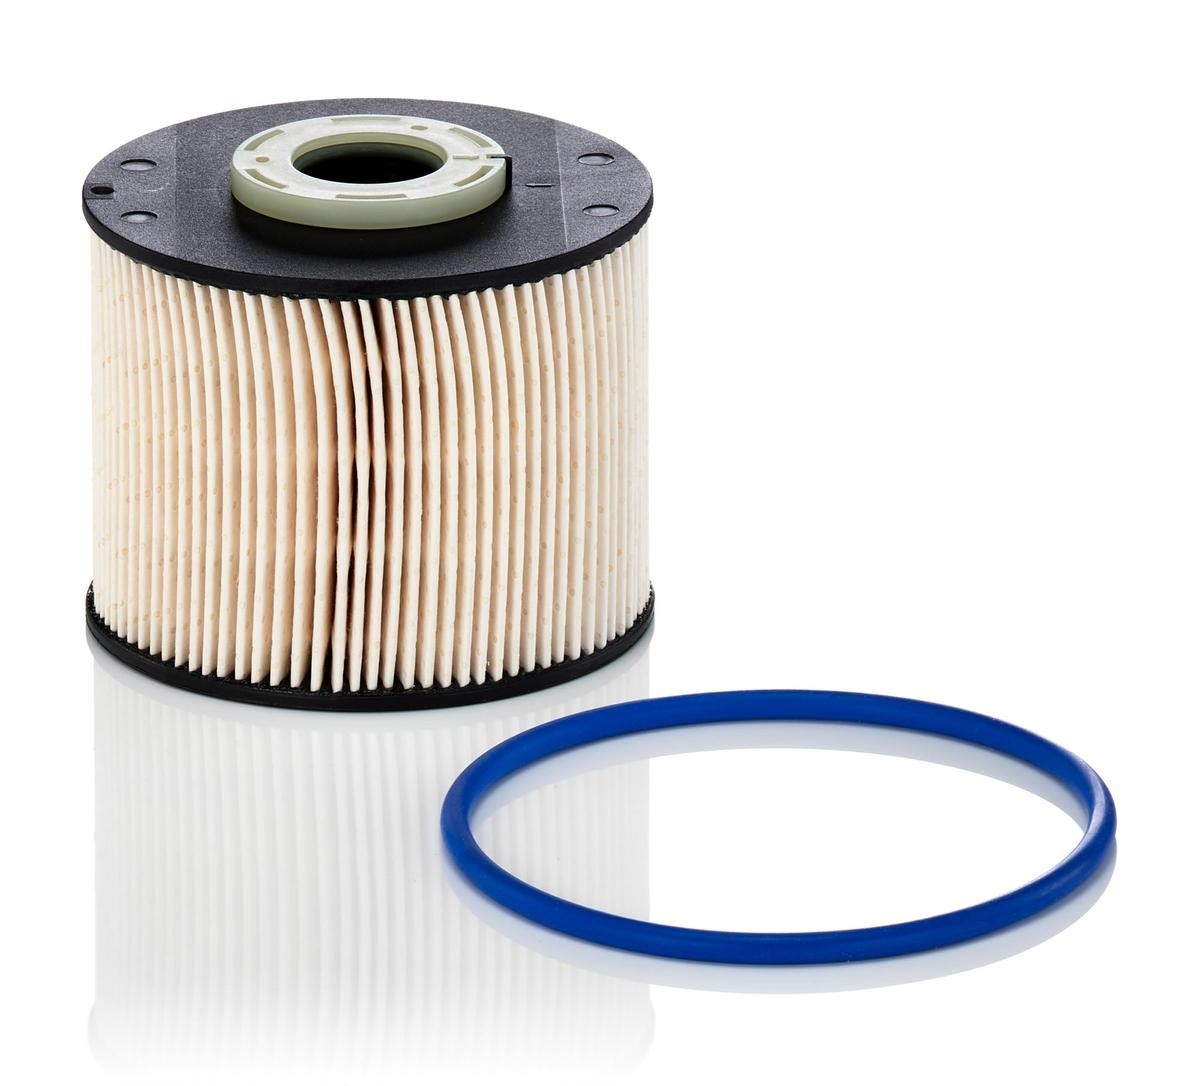 PU 927 x MANN-FILTER Fuel filters Ford FOCUS review